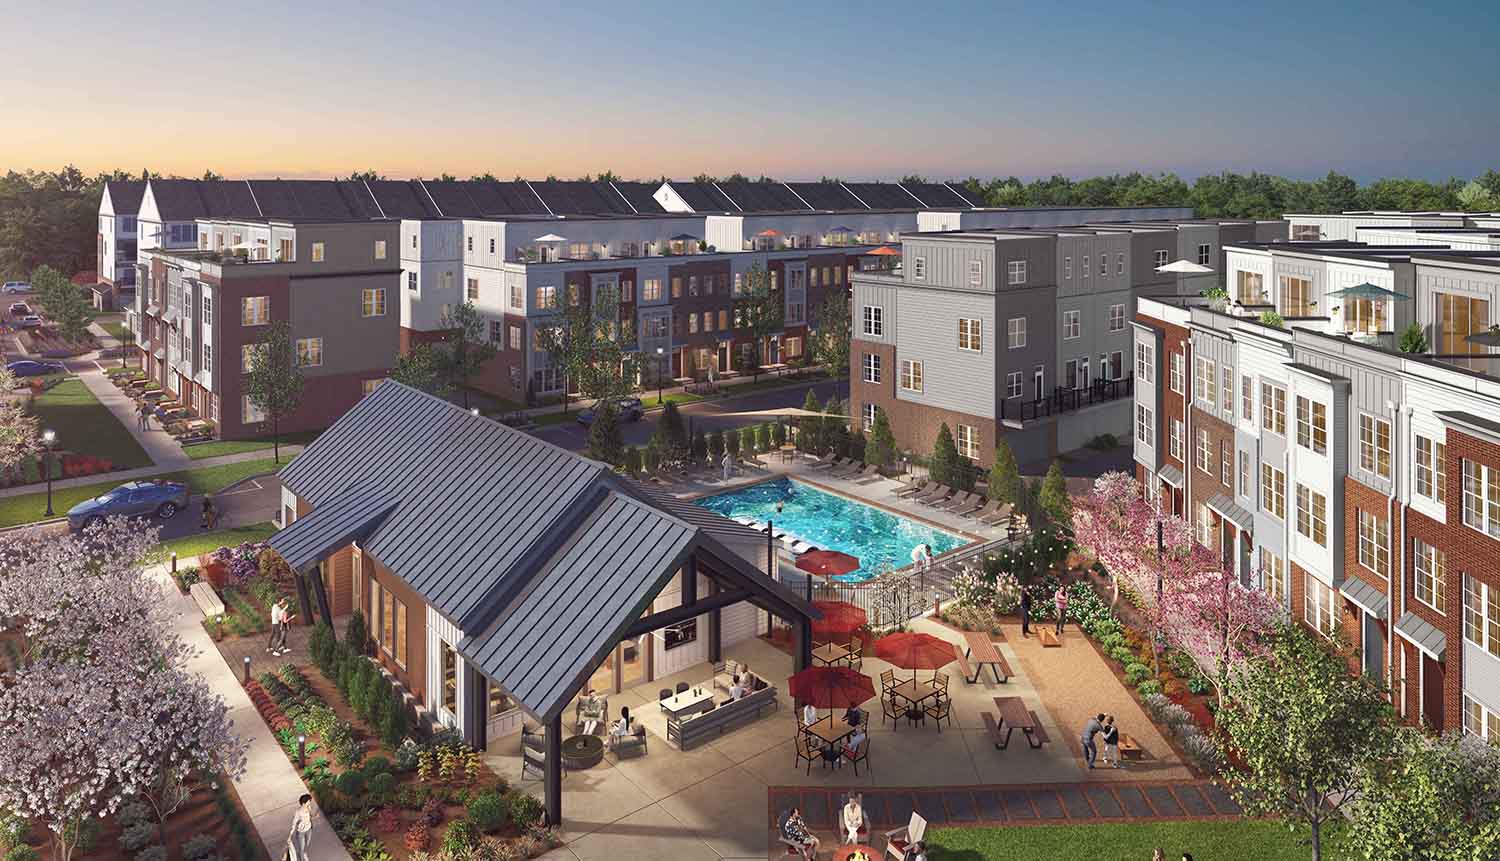 Commercial conversion of former car dealership & annexation brings 370 new homes to the City of Rockville